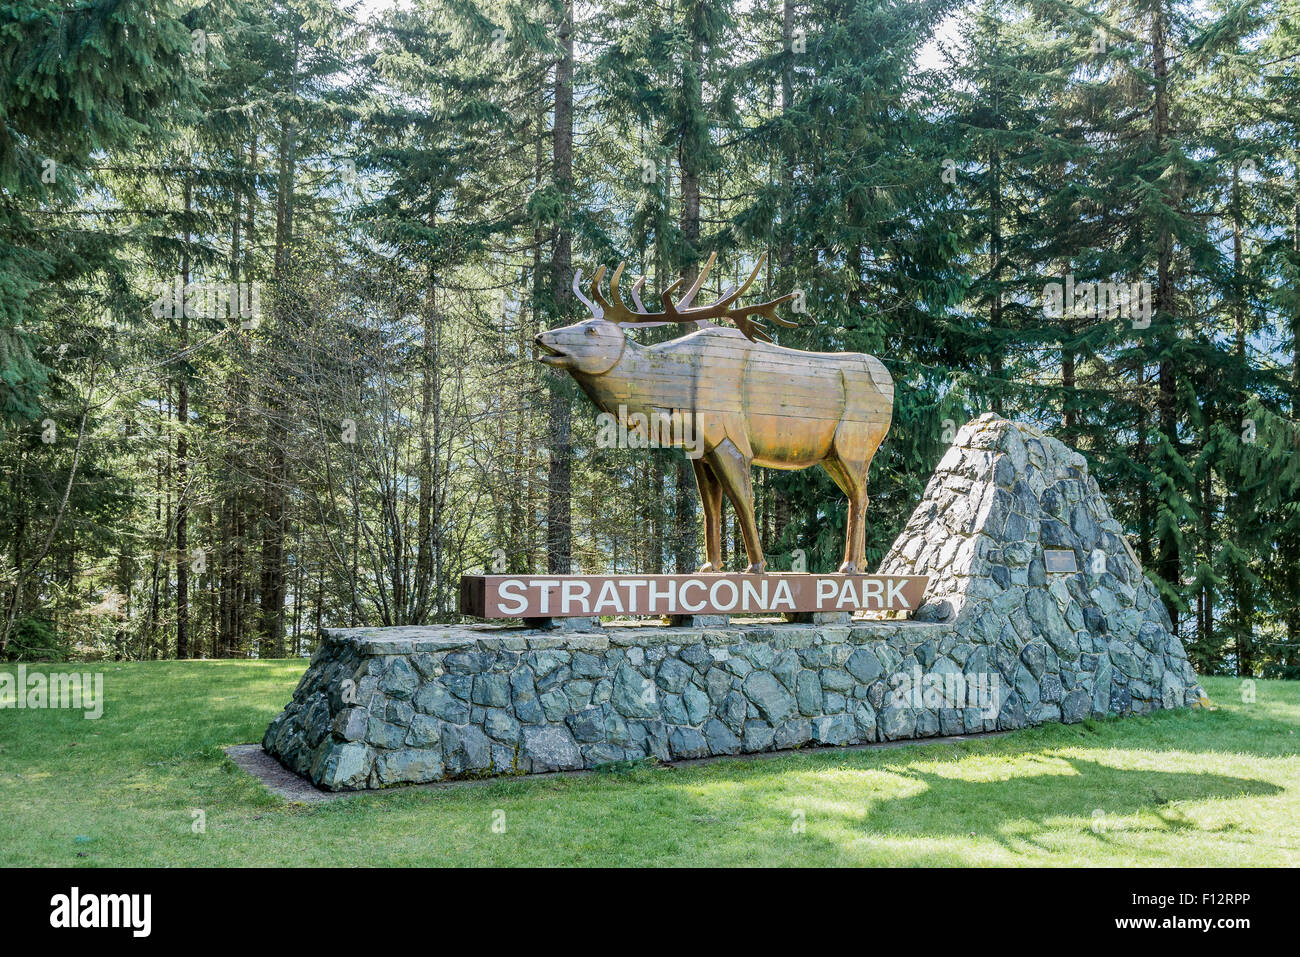 Strathcona Provincial Park, entrance sign featuring carved Roosevelt Elk, Vancouver Island, British Columbia, Canada Stock Photo